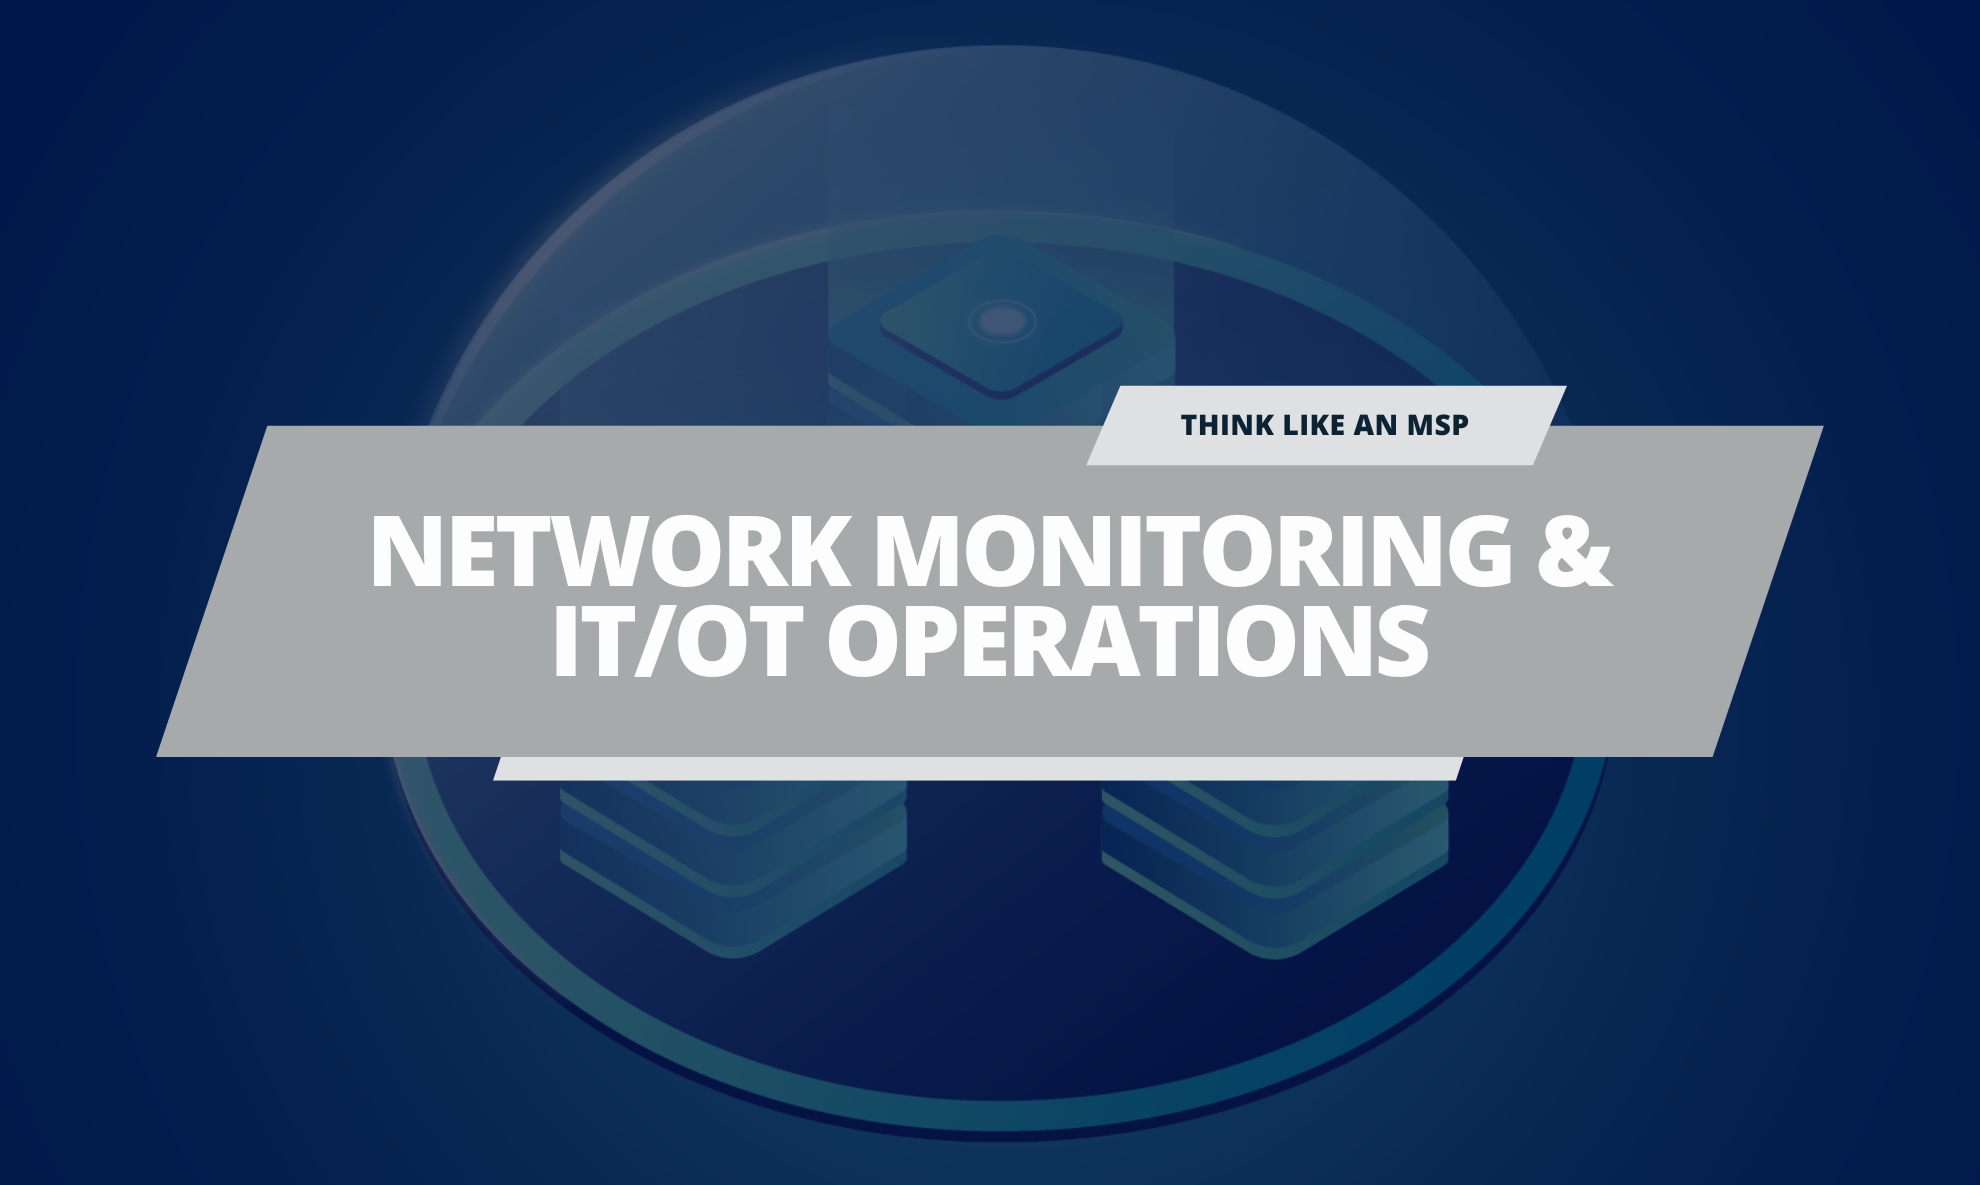 Network Monitoring at the Convergence of IT/OT Operations